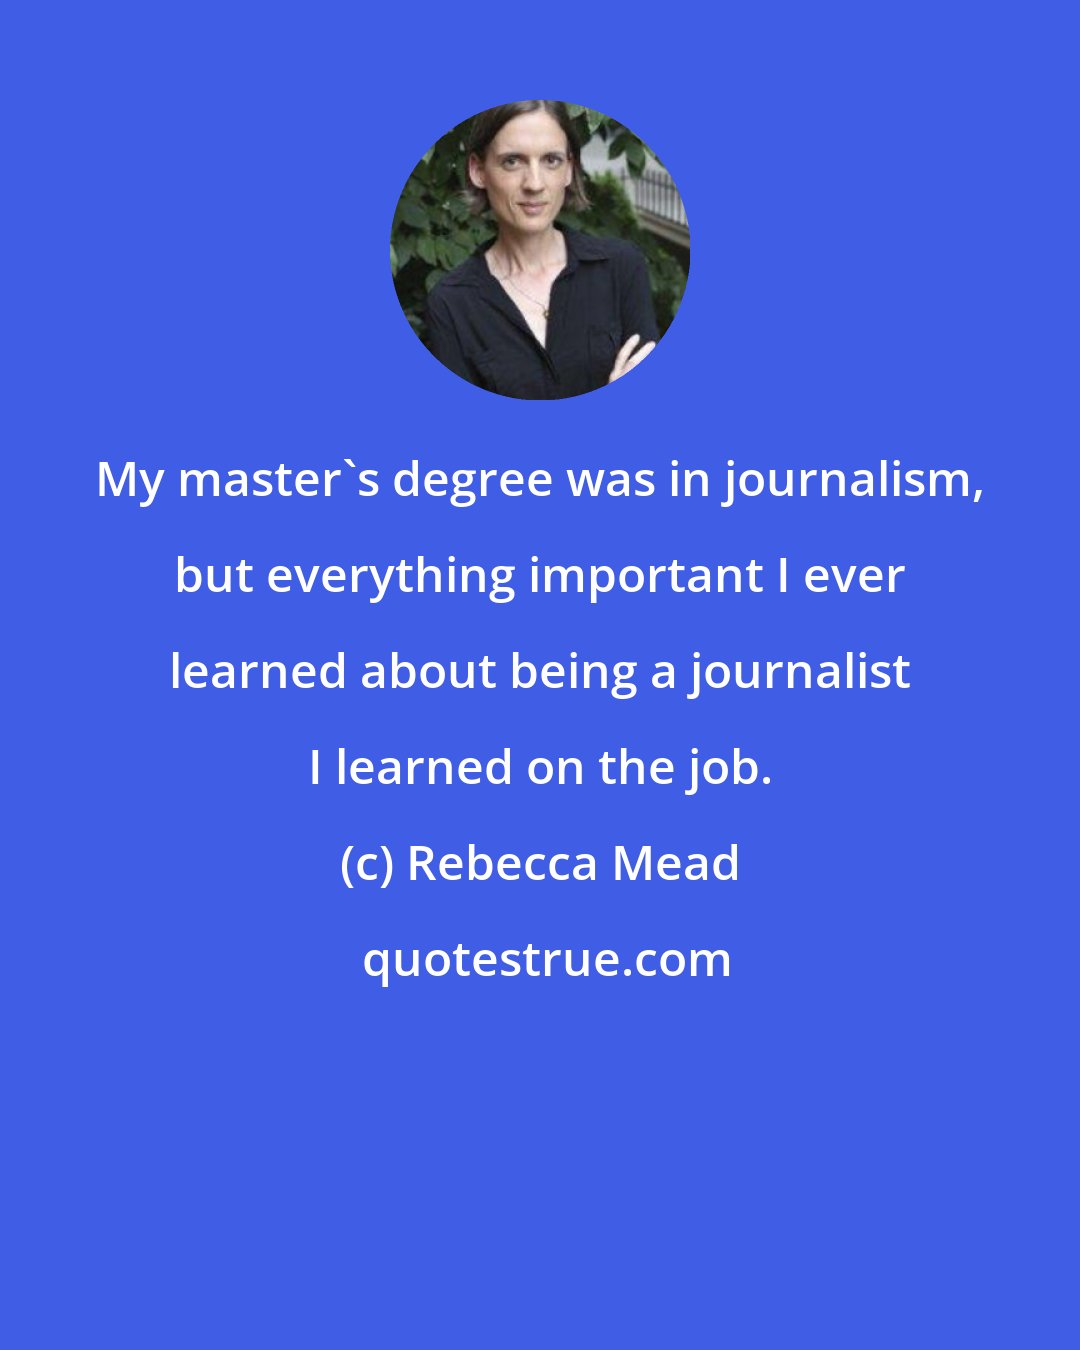 Rebecca Mead: My master's degree was in journalism, but everything important I ever learned about being a journalist I learned on the job.